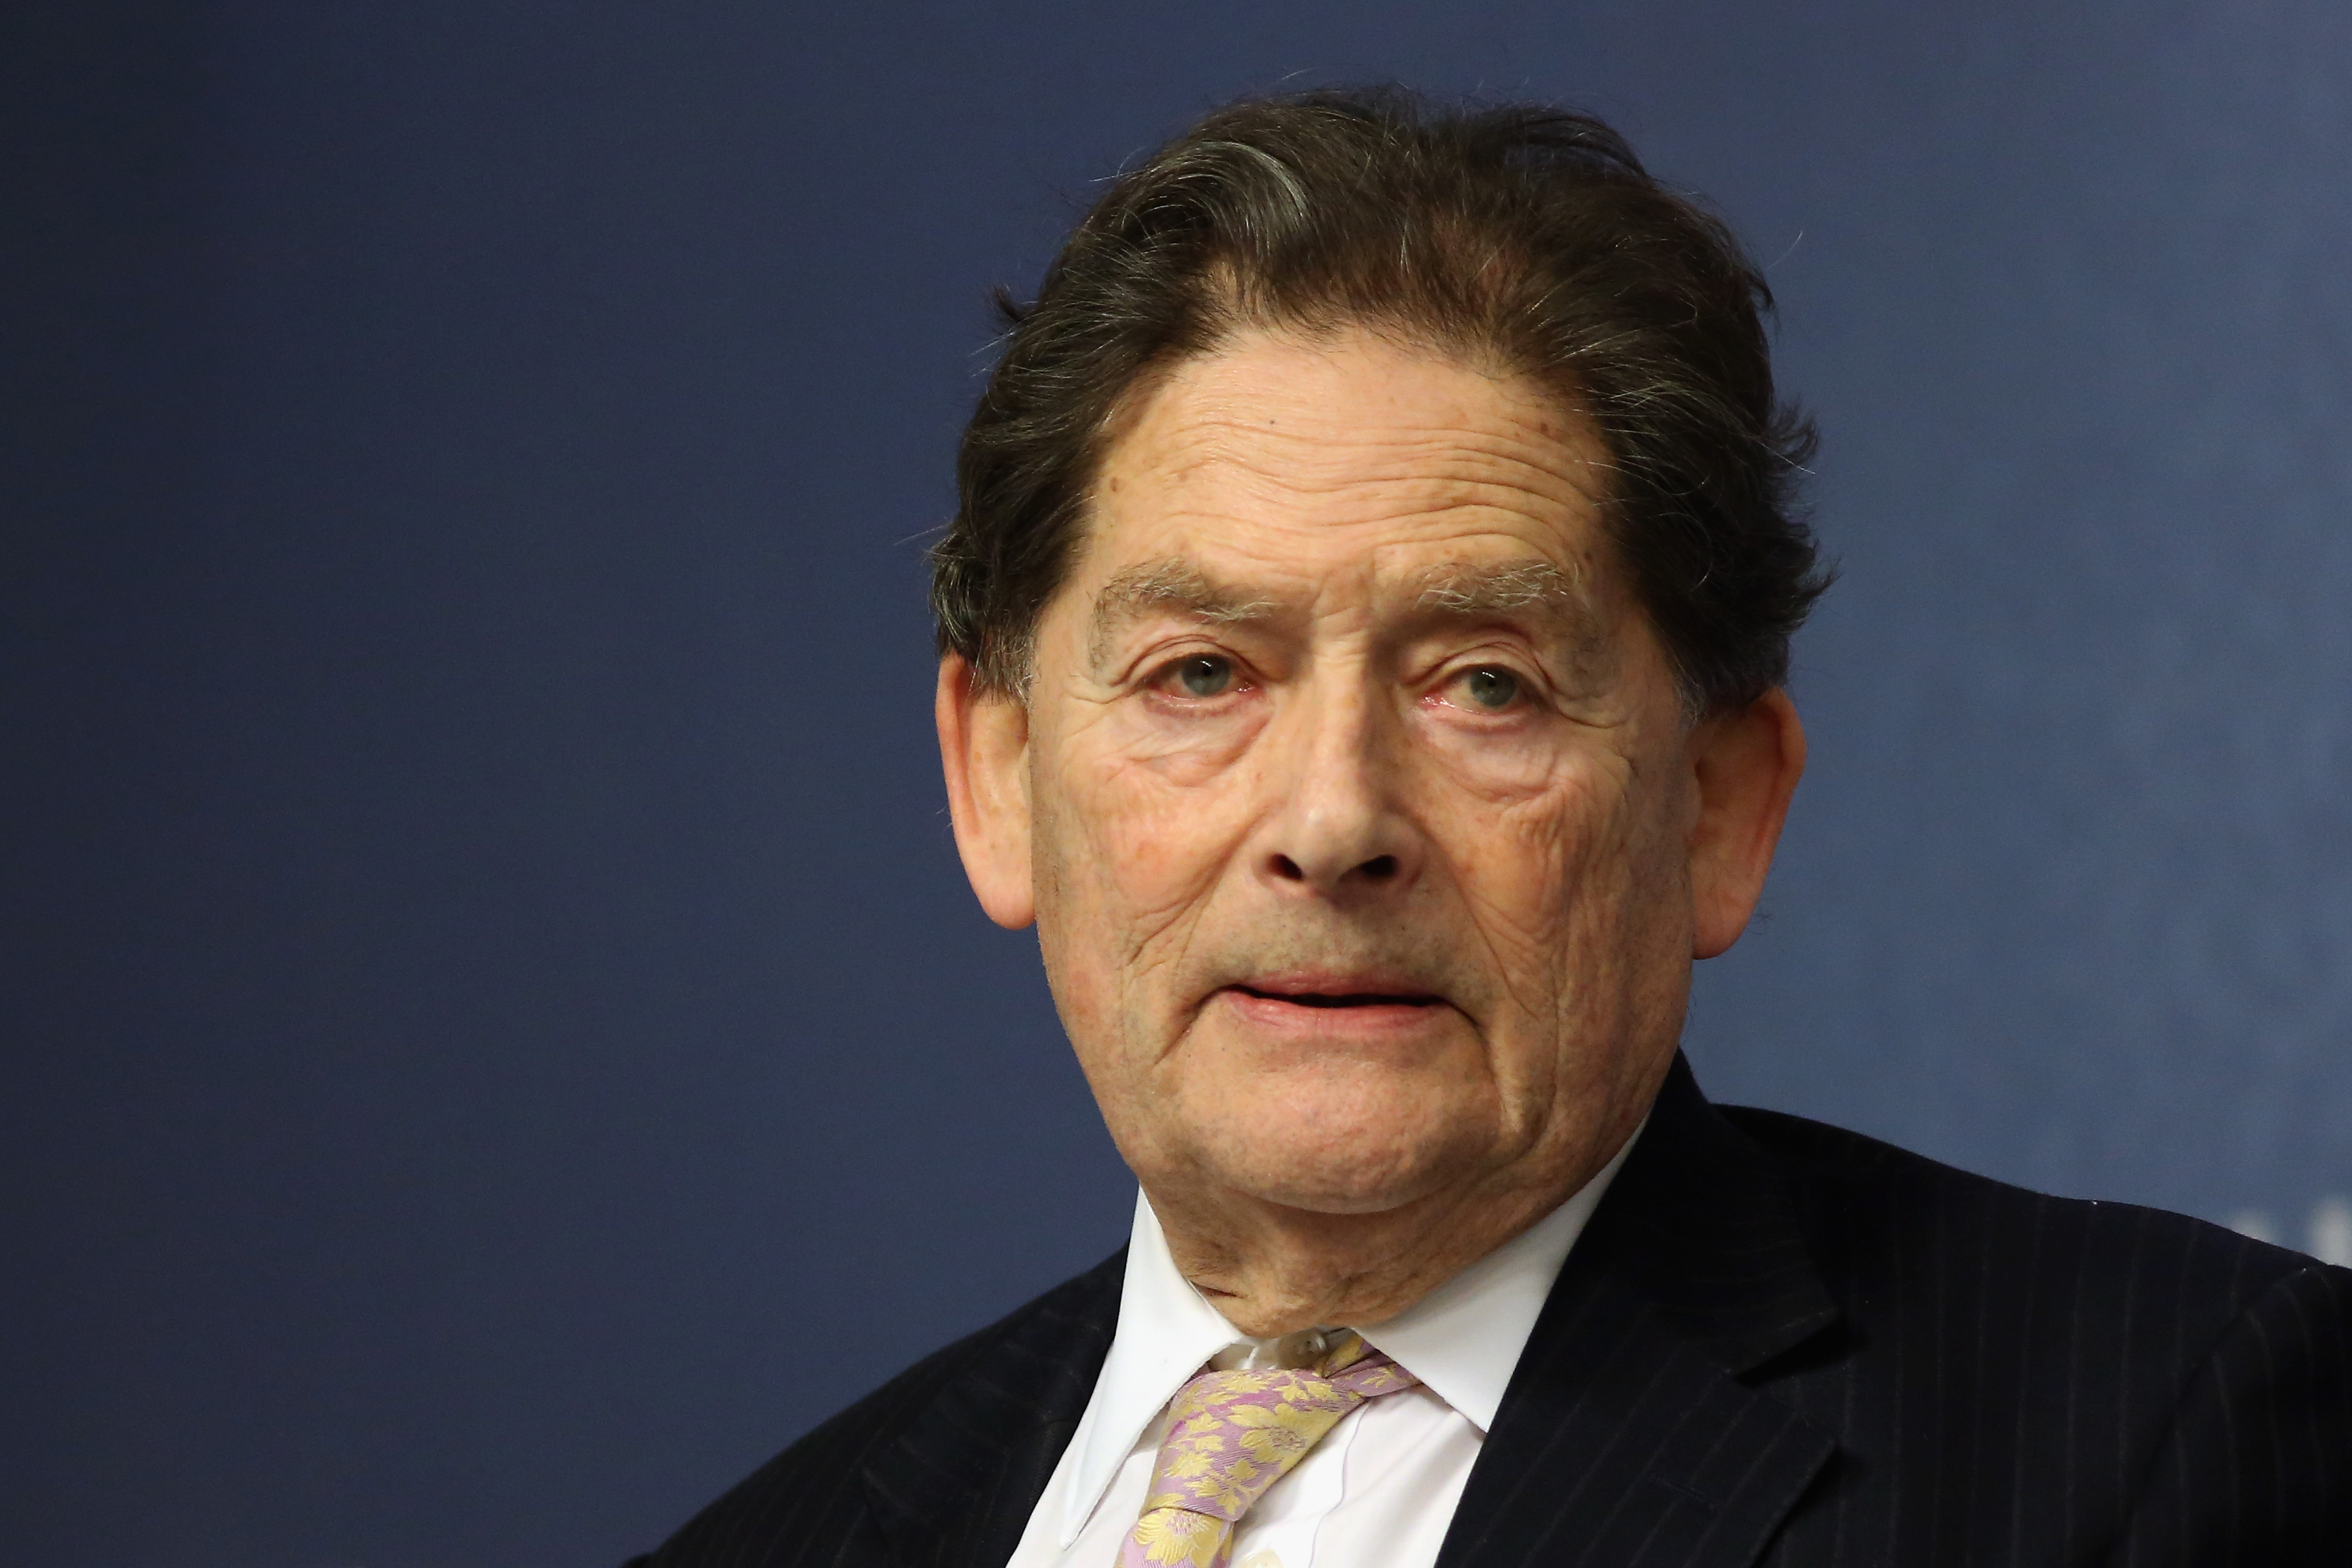 Former Conservative MP Nigel Lawson died at the age of 91